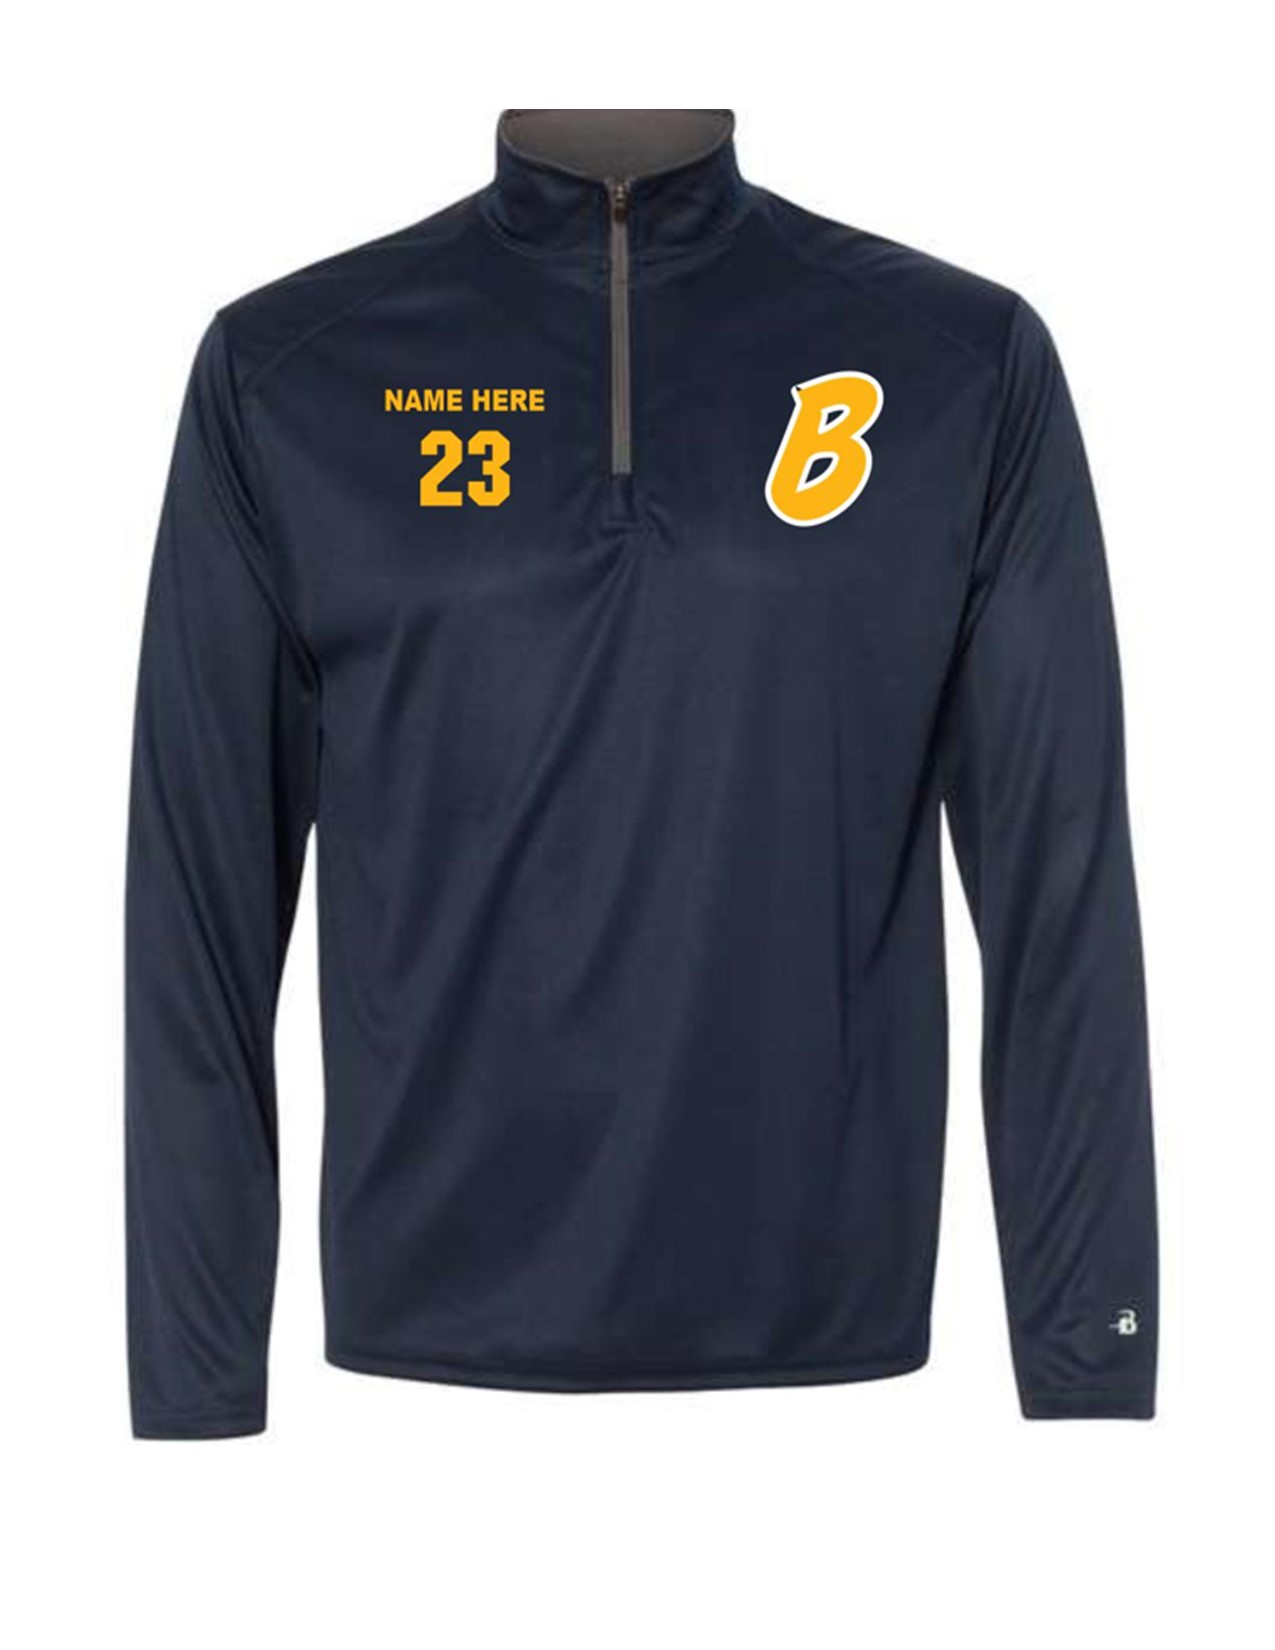 91 Badger 4102 Men's B-Core 1/4 Zip with Embroidery